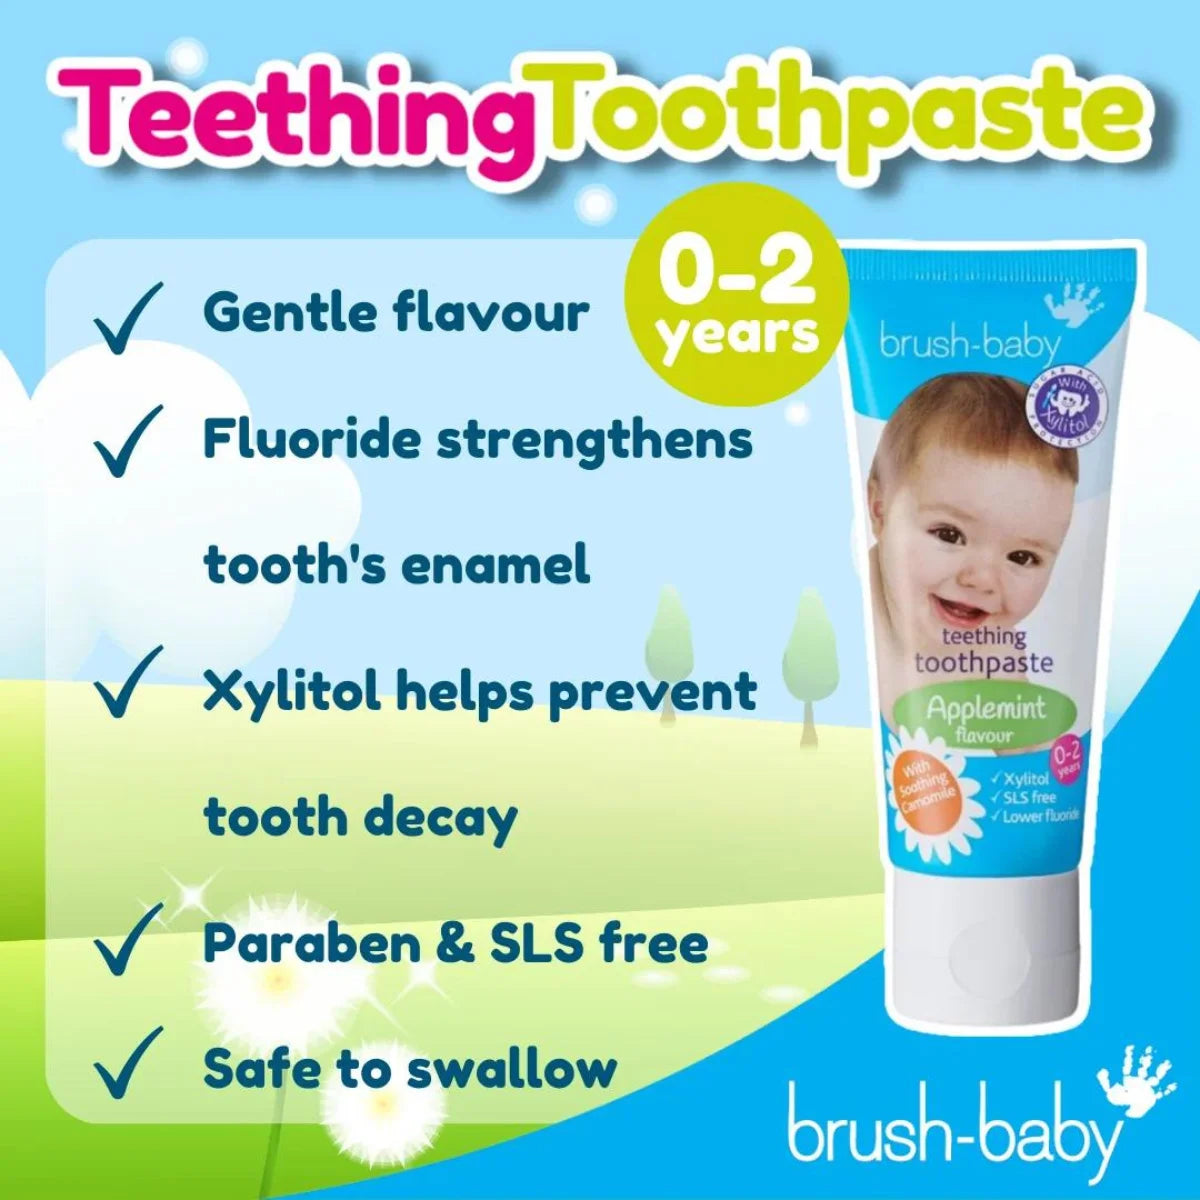  applemint flavoured baby teething toothpaste for toddlers